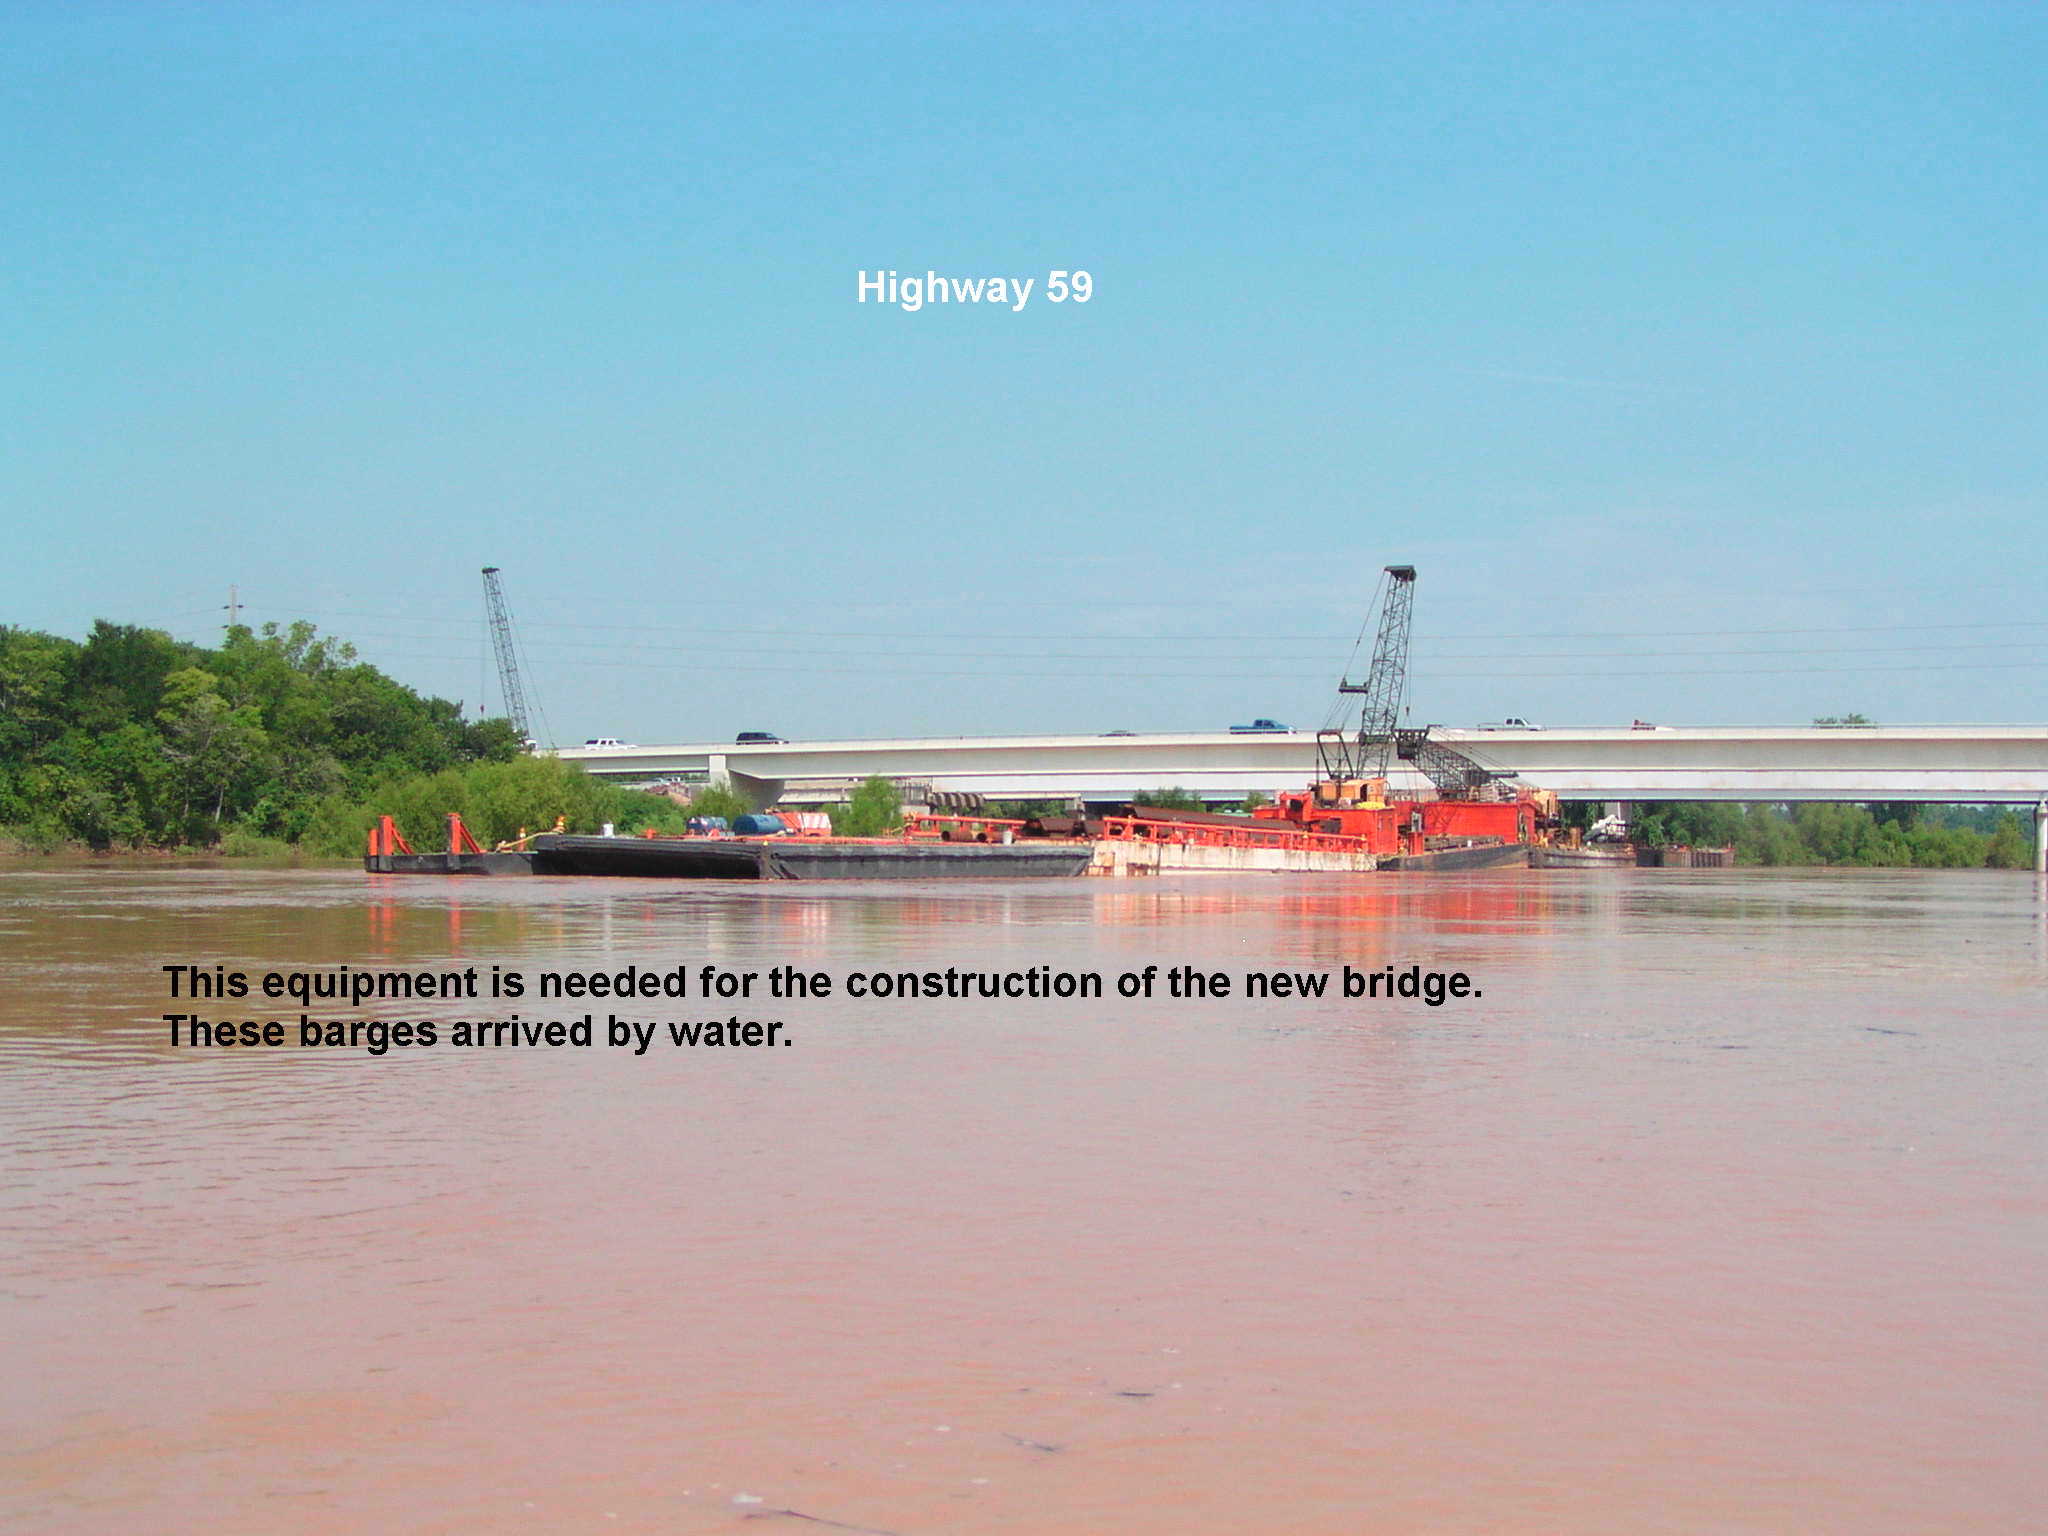 The construction of additional lanes for Hwy 59 over the Brazos River.